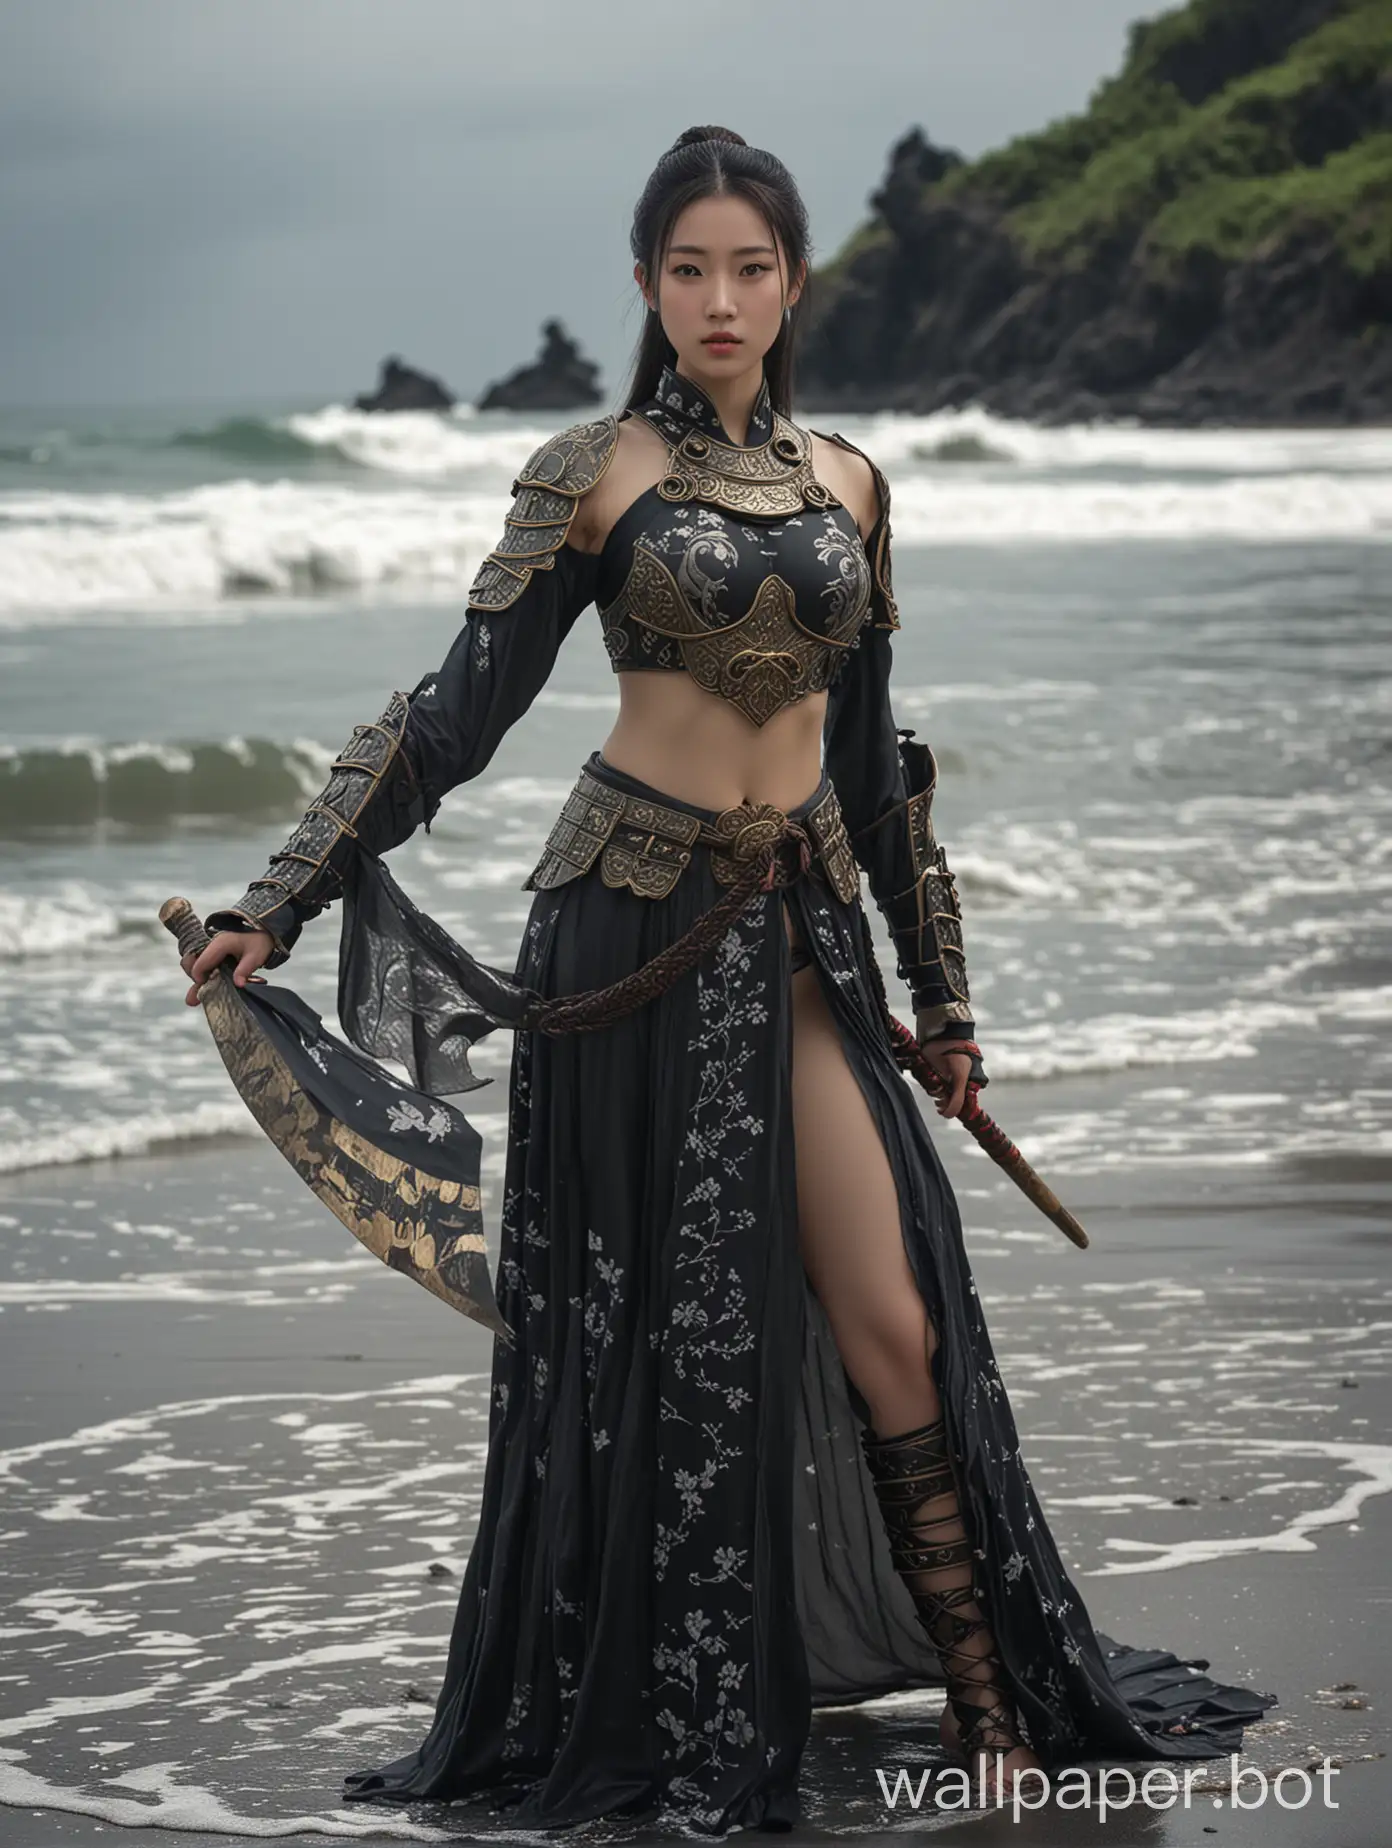 Wuxia warrior princess posing heroically at black sand beach she’s wearing an elegant two piece swimming outfit plate armor art house film still ar style